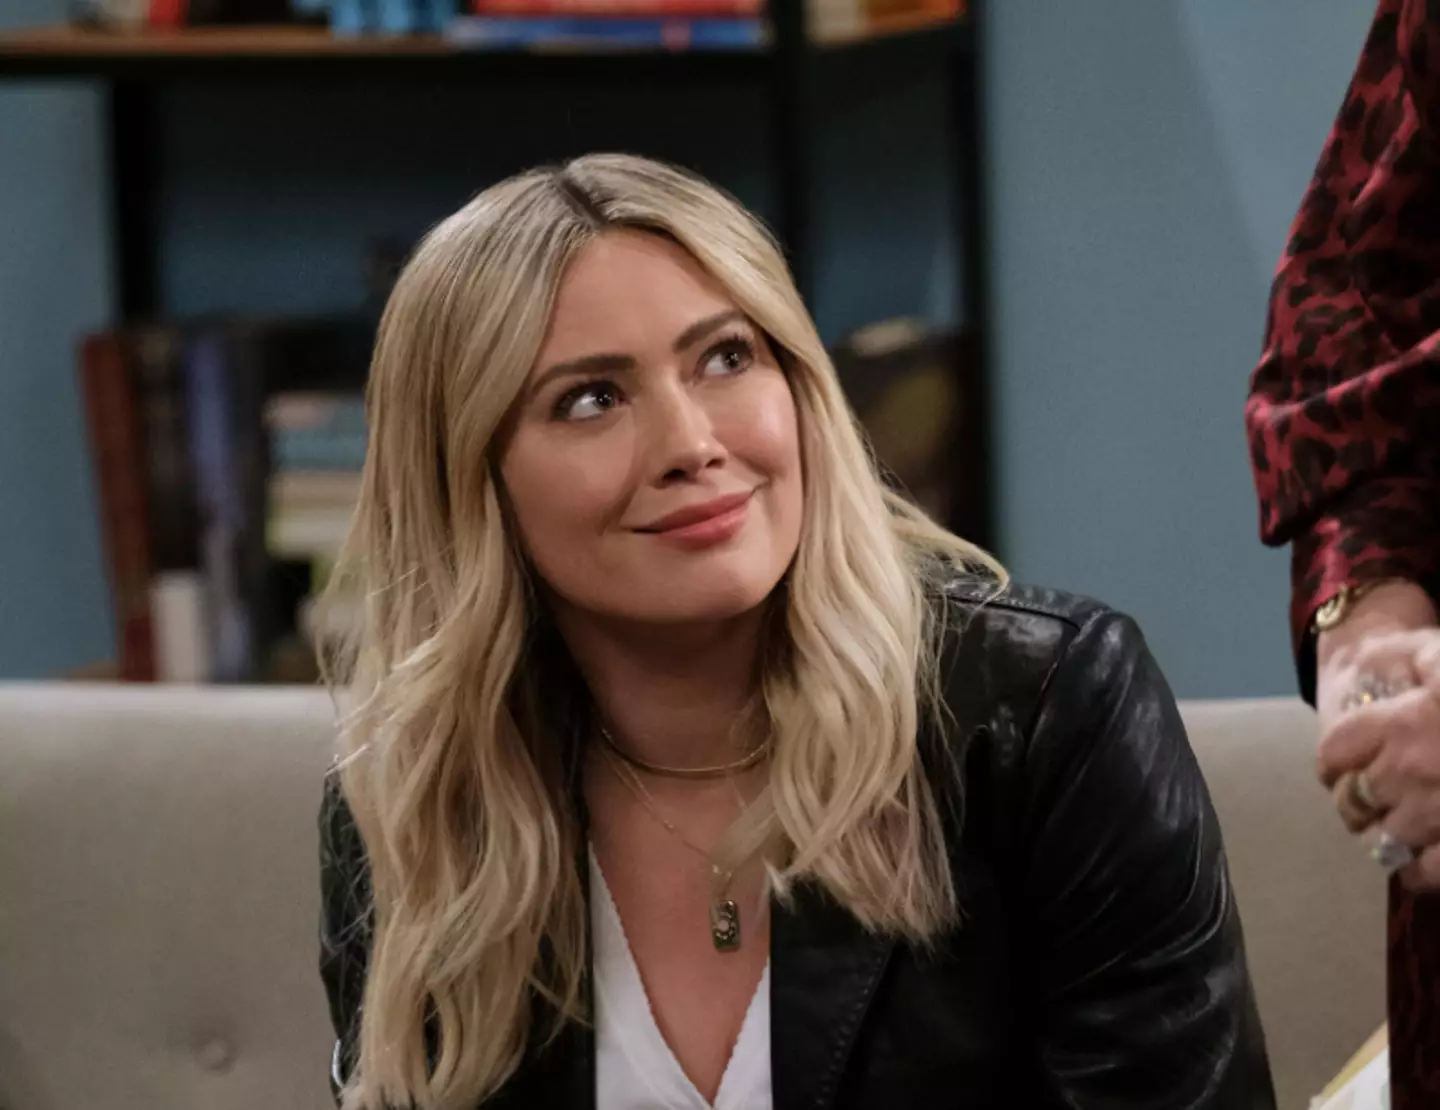 Hilary Duff plays hopeless romantic Sophie in 'How I Met Your Father'.